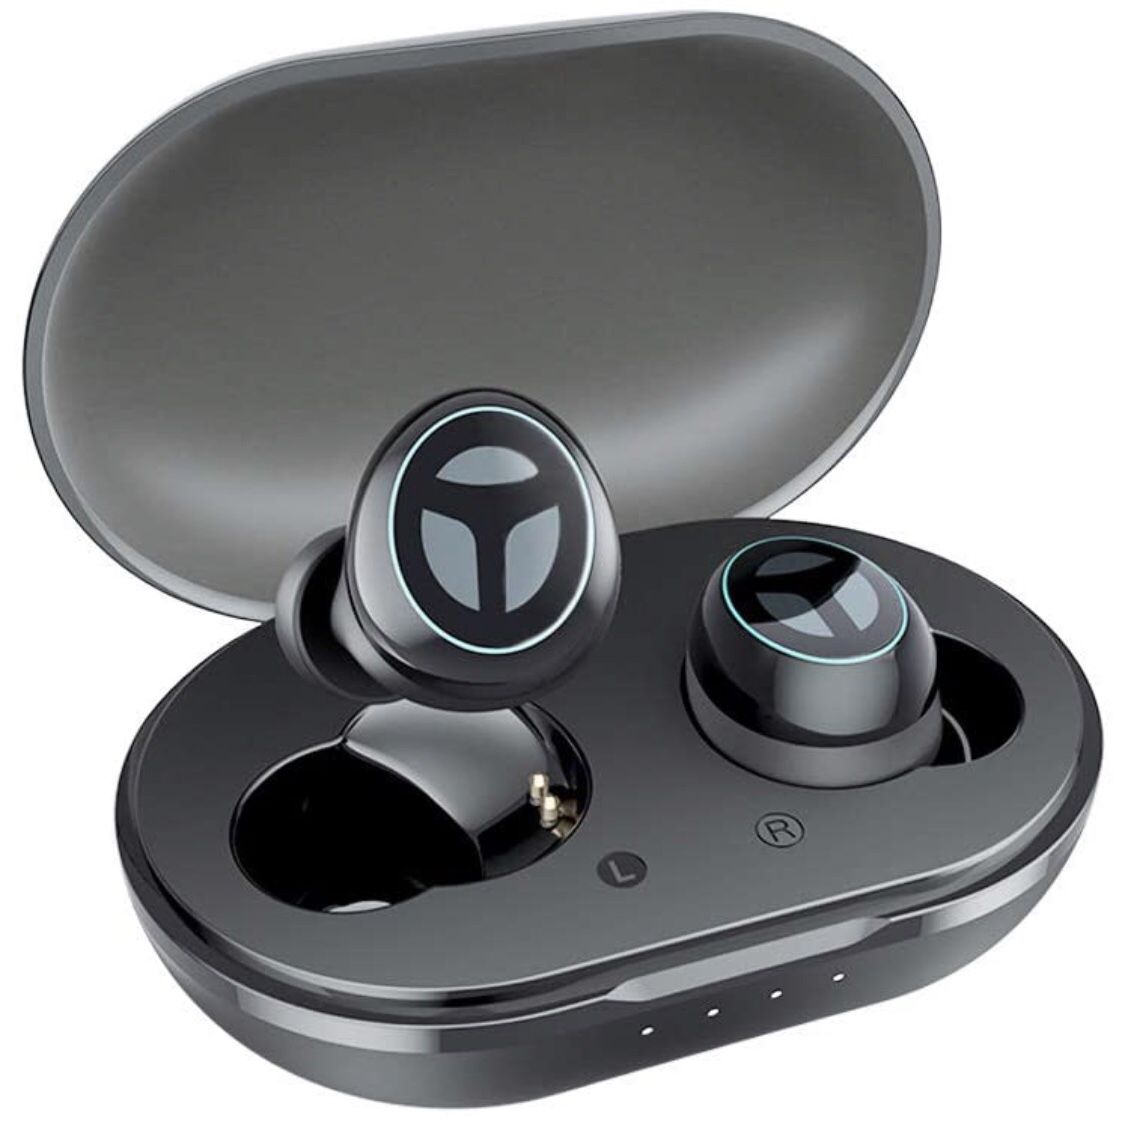 Water Resistant Sports Wireless Earbuds for iphone and samsung